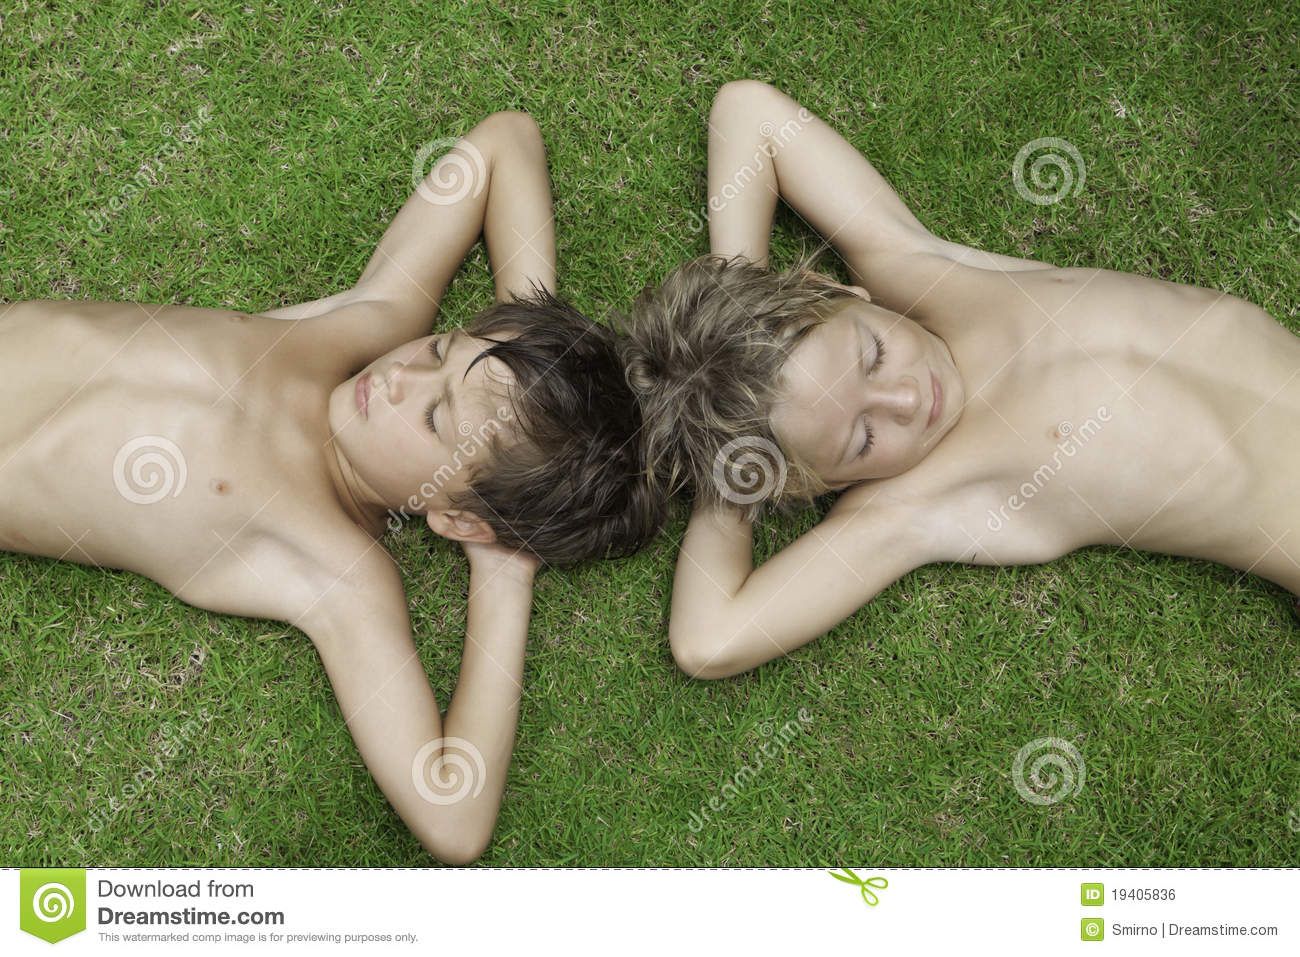 2 boys in bed naked